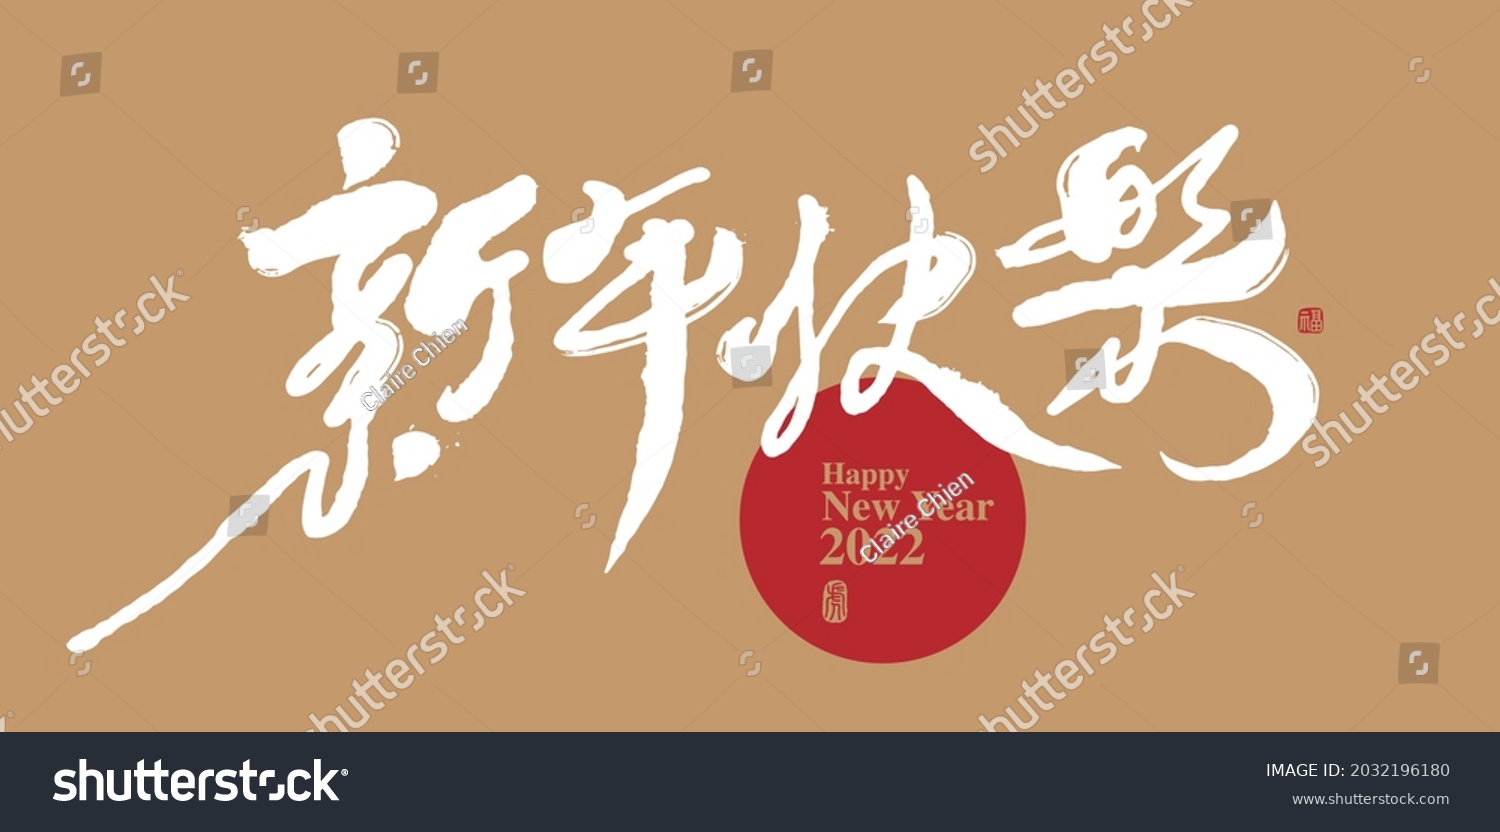 stock-vector-chinese-traditional-calligraphy-chinese-character-happy-new-year-the-word-on-the-seal-means-2032196180